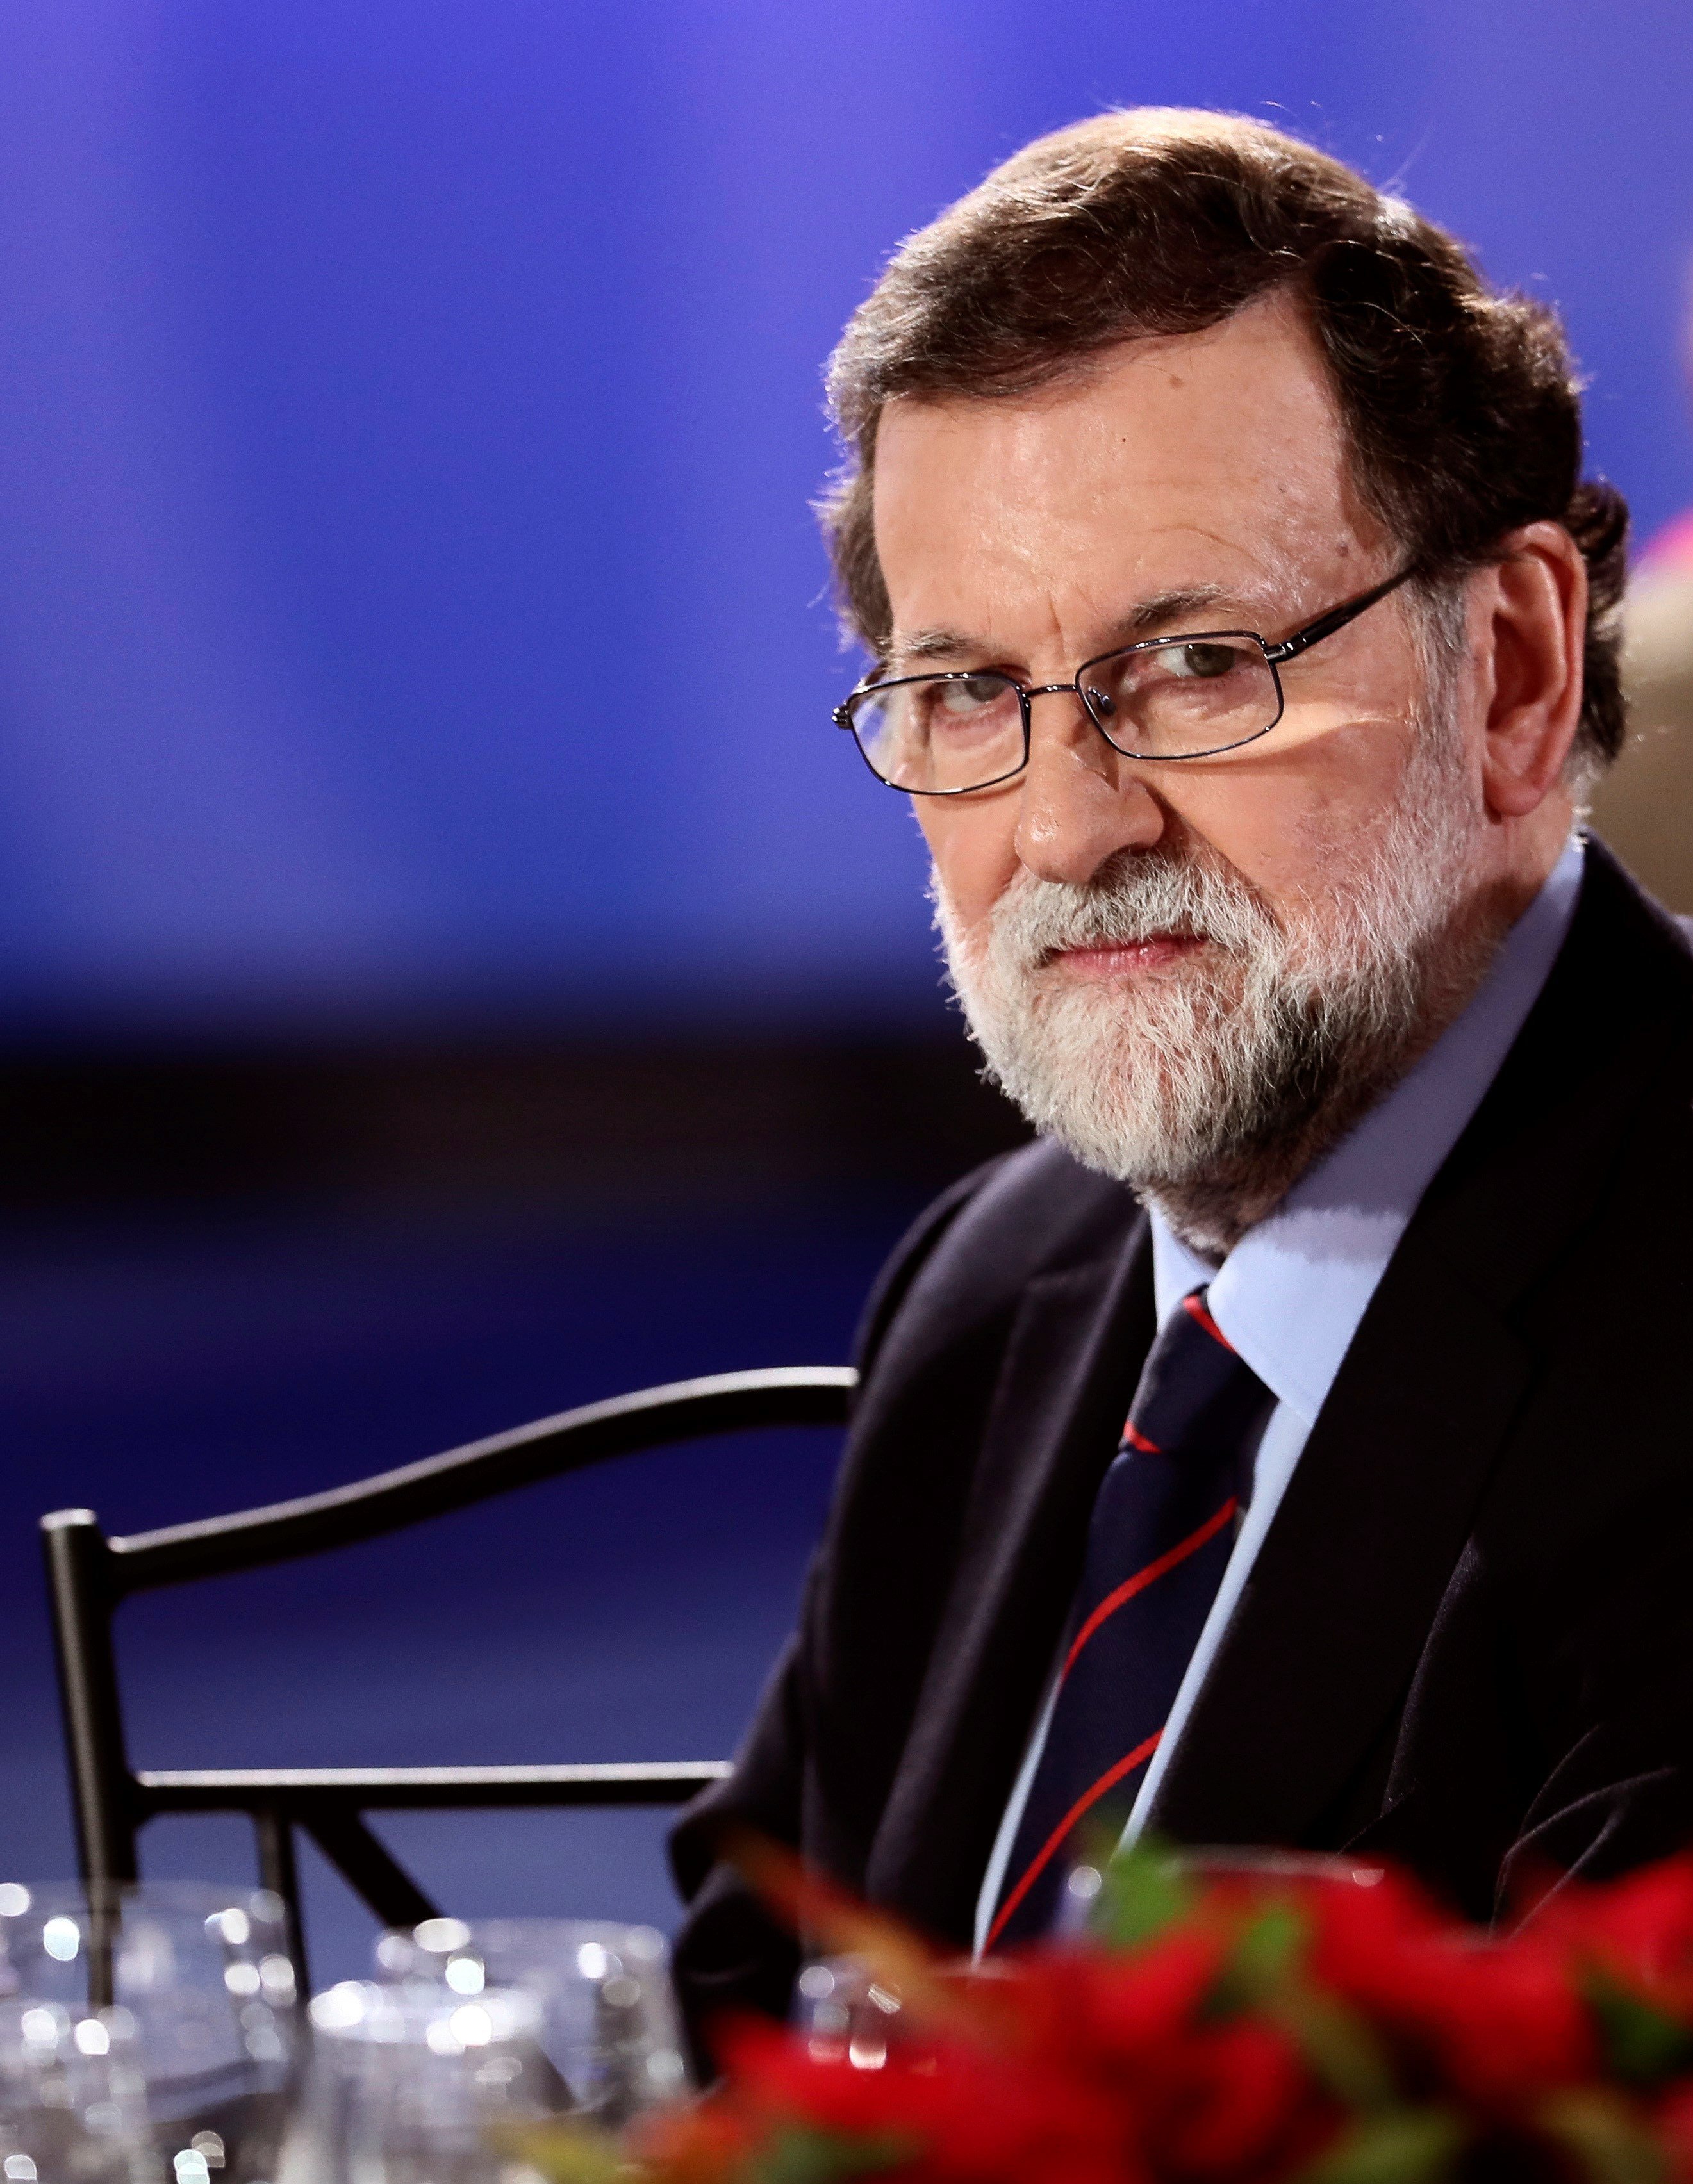 Rajoy brushes aside Puigdemont's proposal to meet